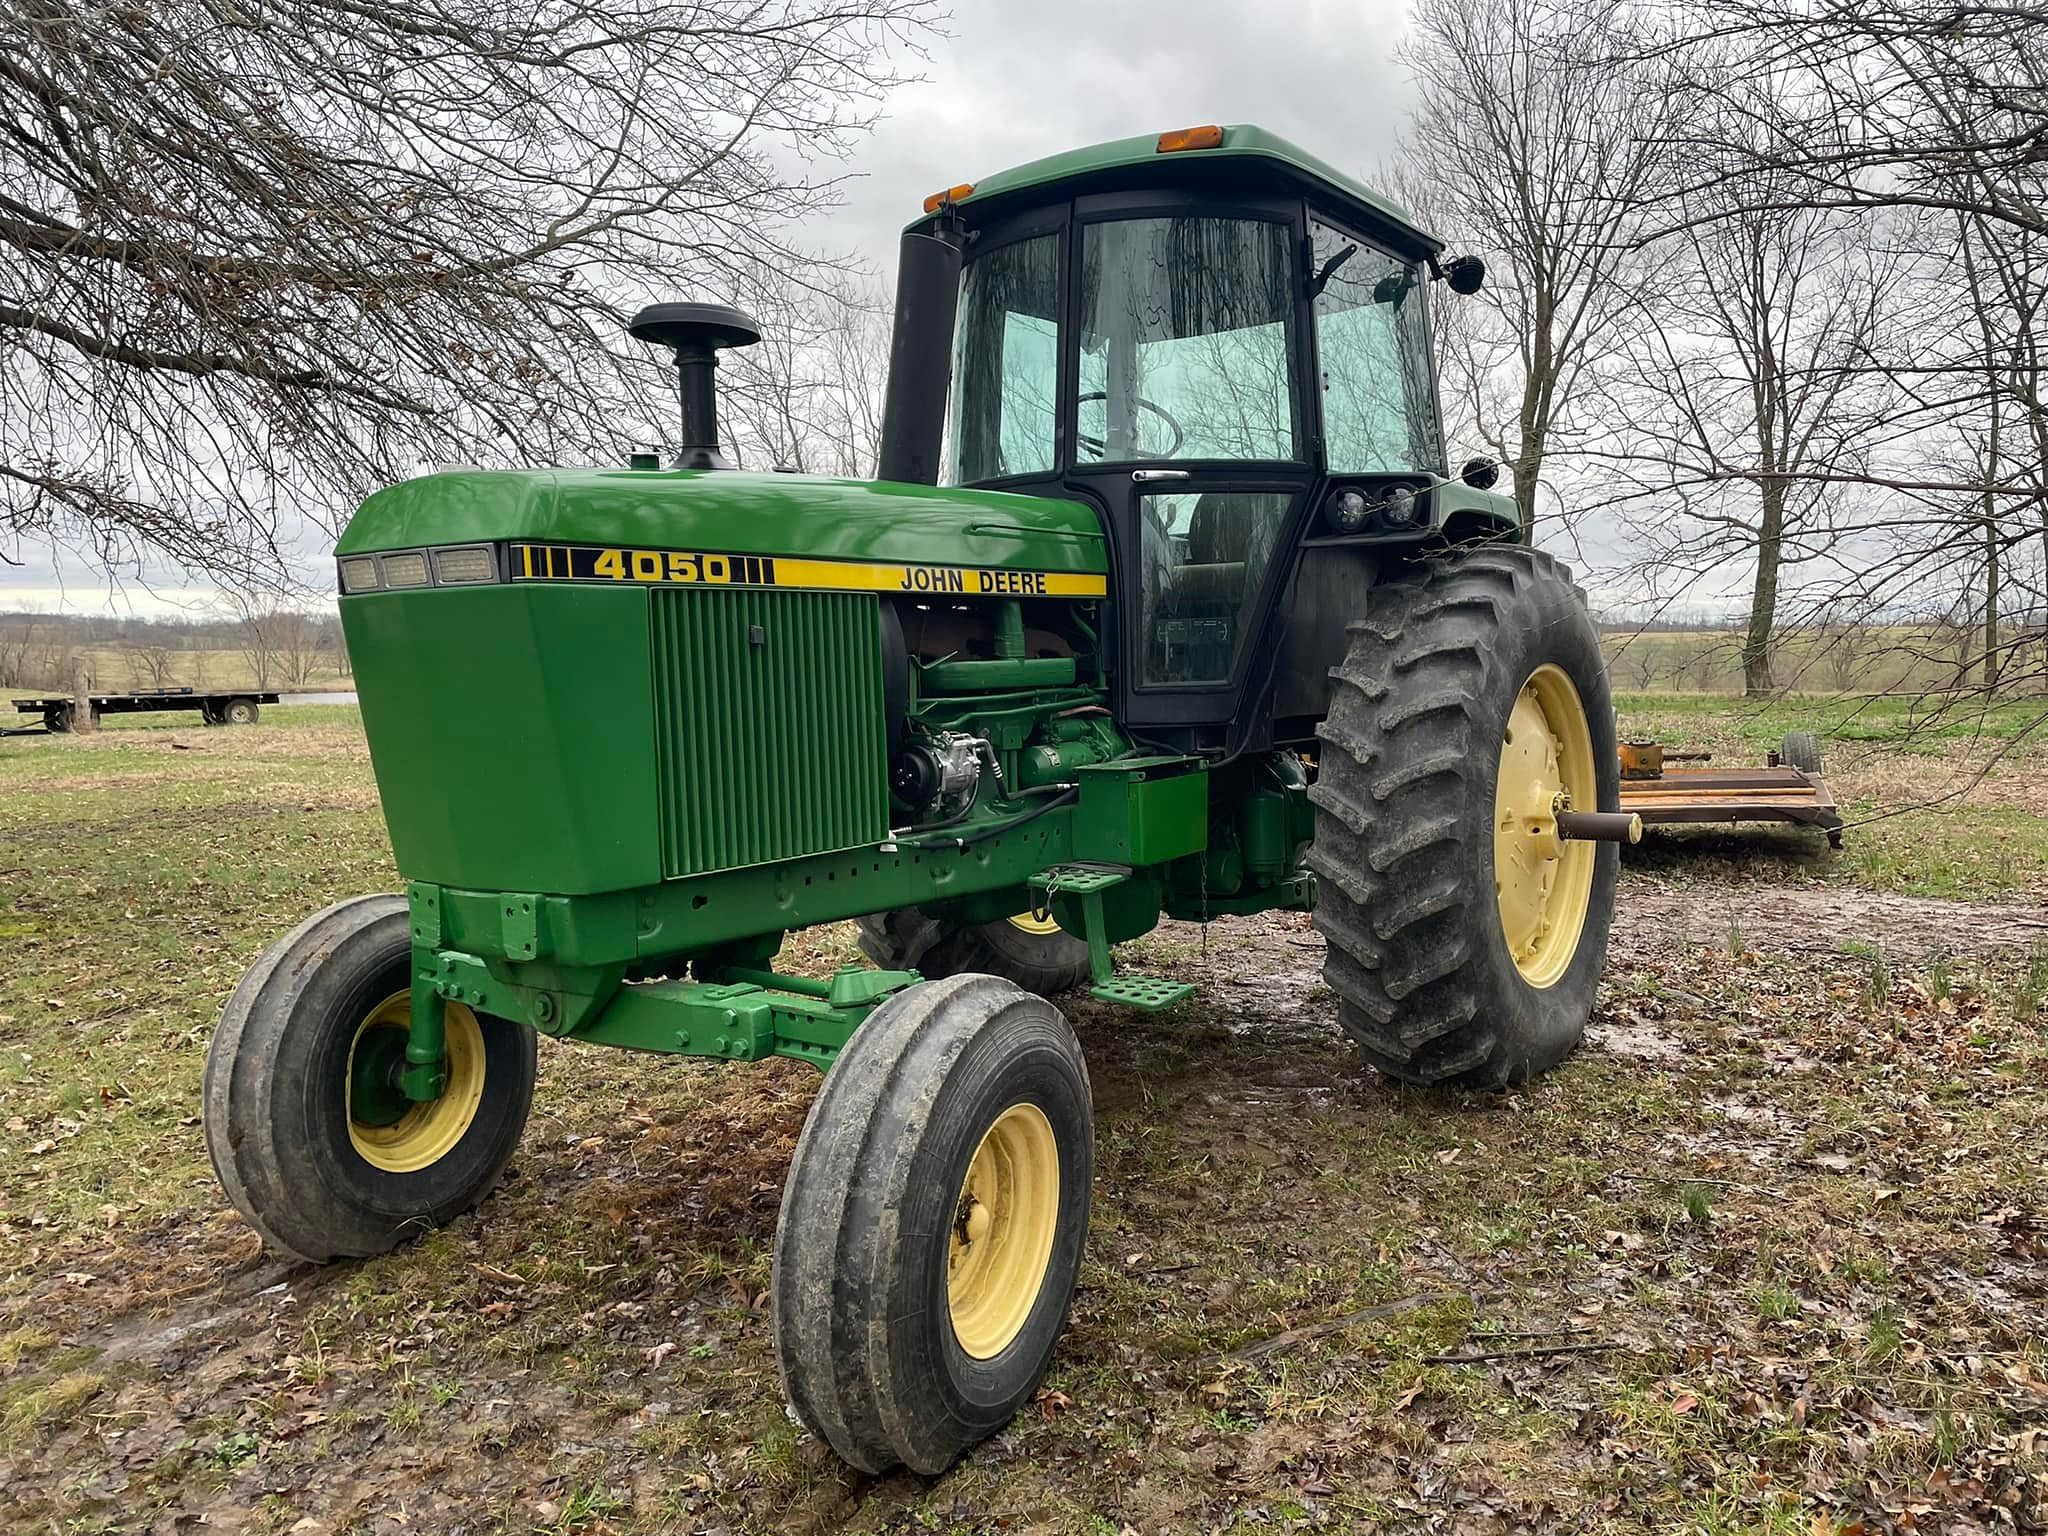 John Deere 4050 at a dustin mallory auction